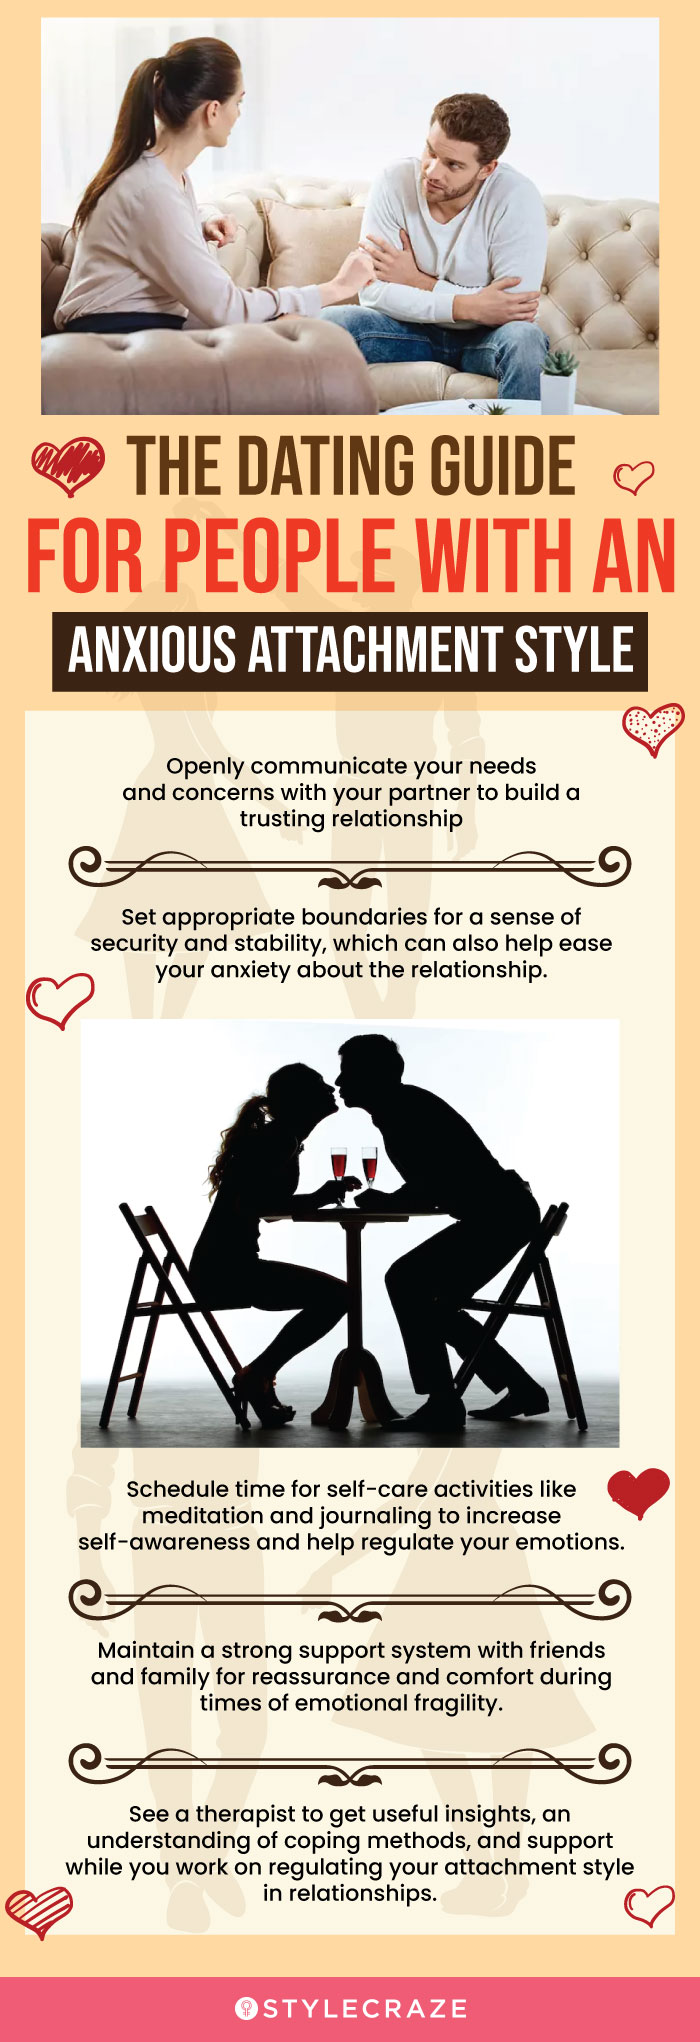 the dating guide to people with anxious attachment style (infographic)